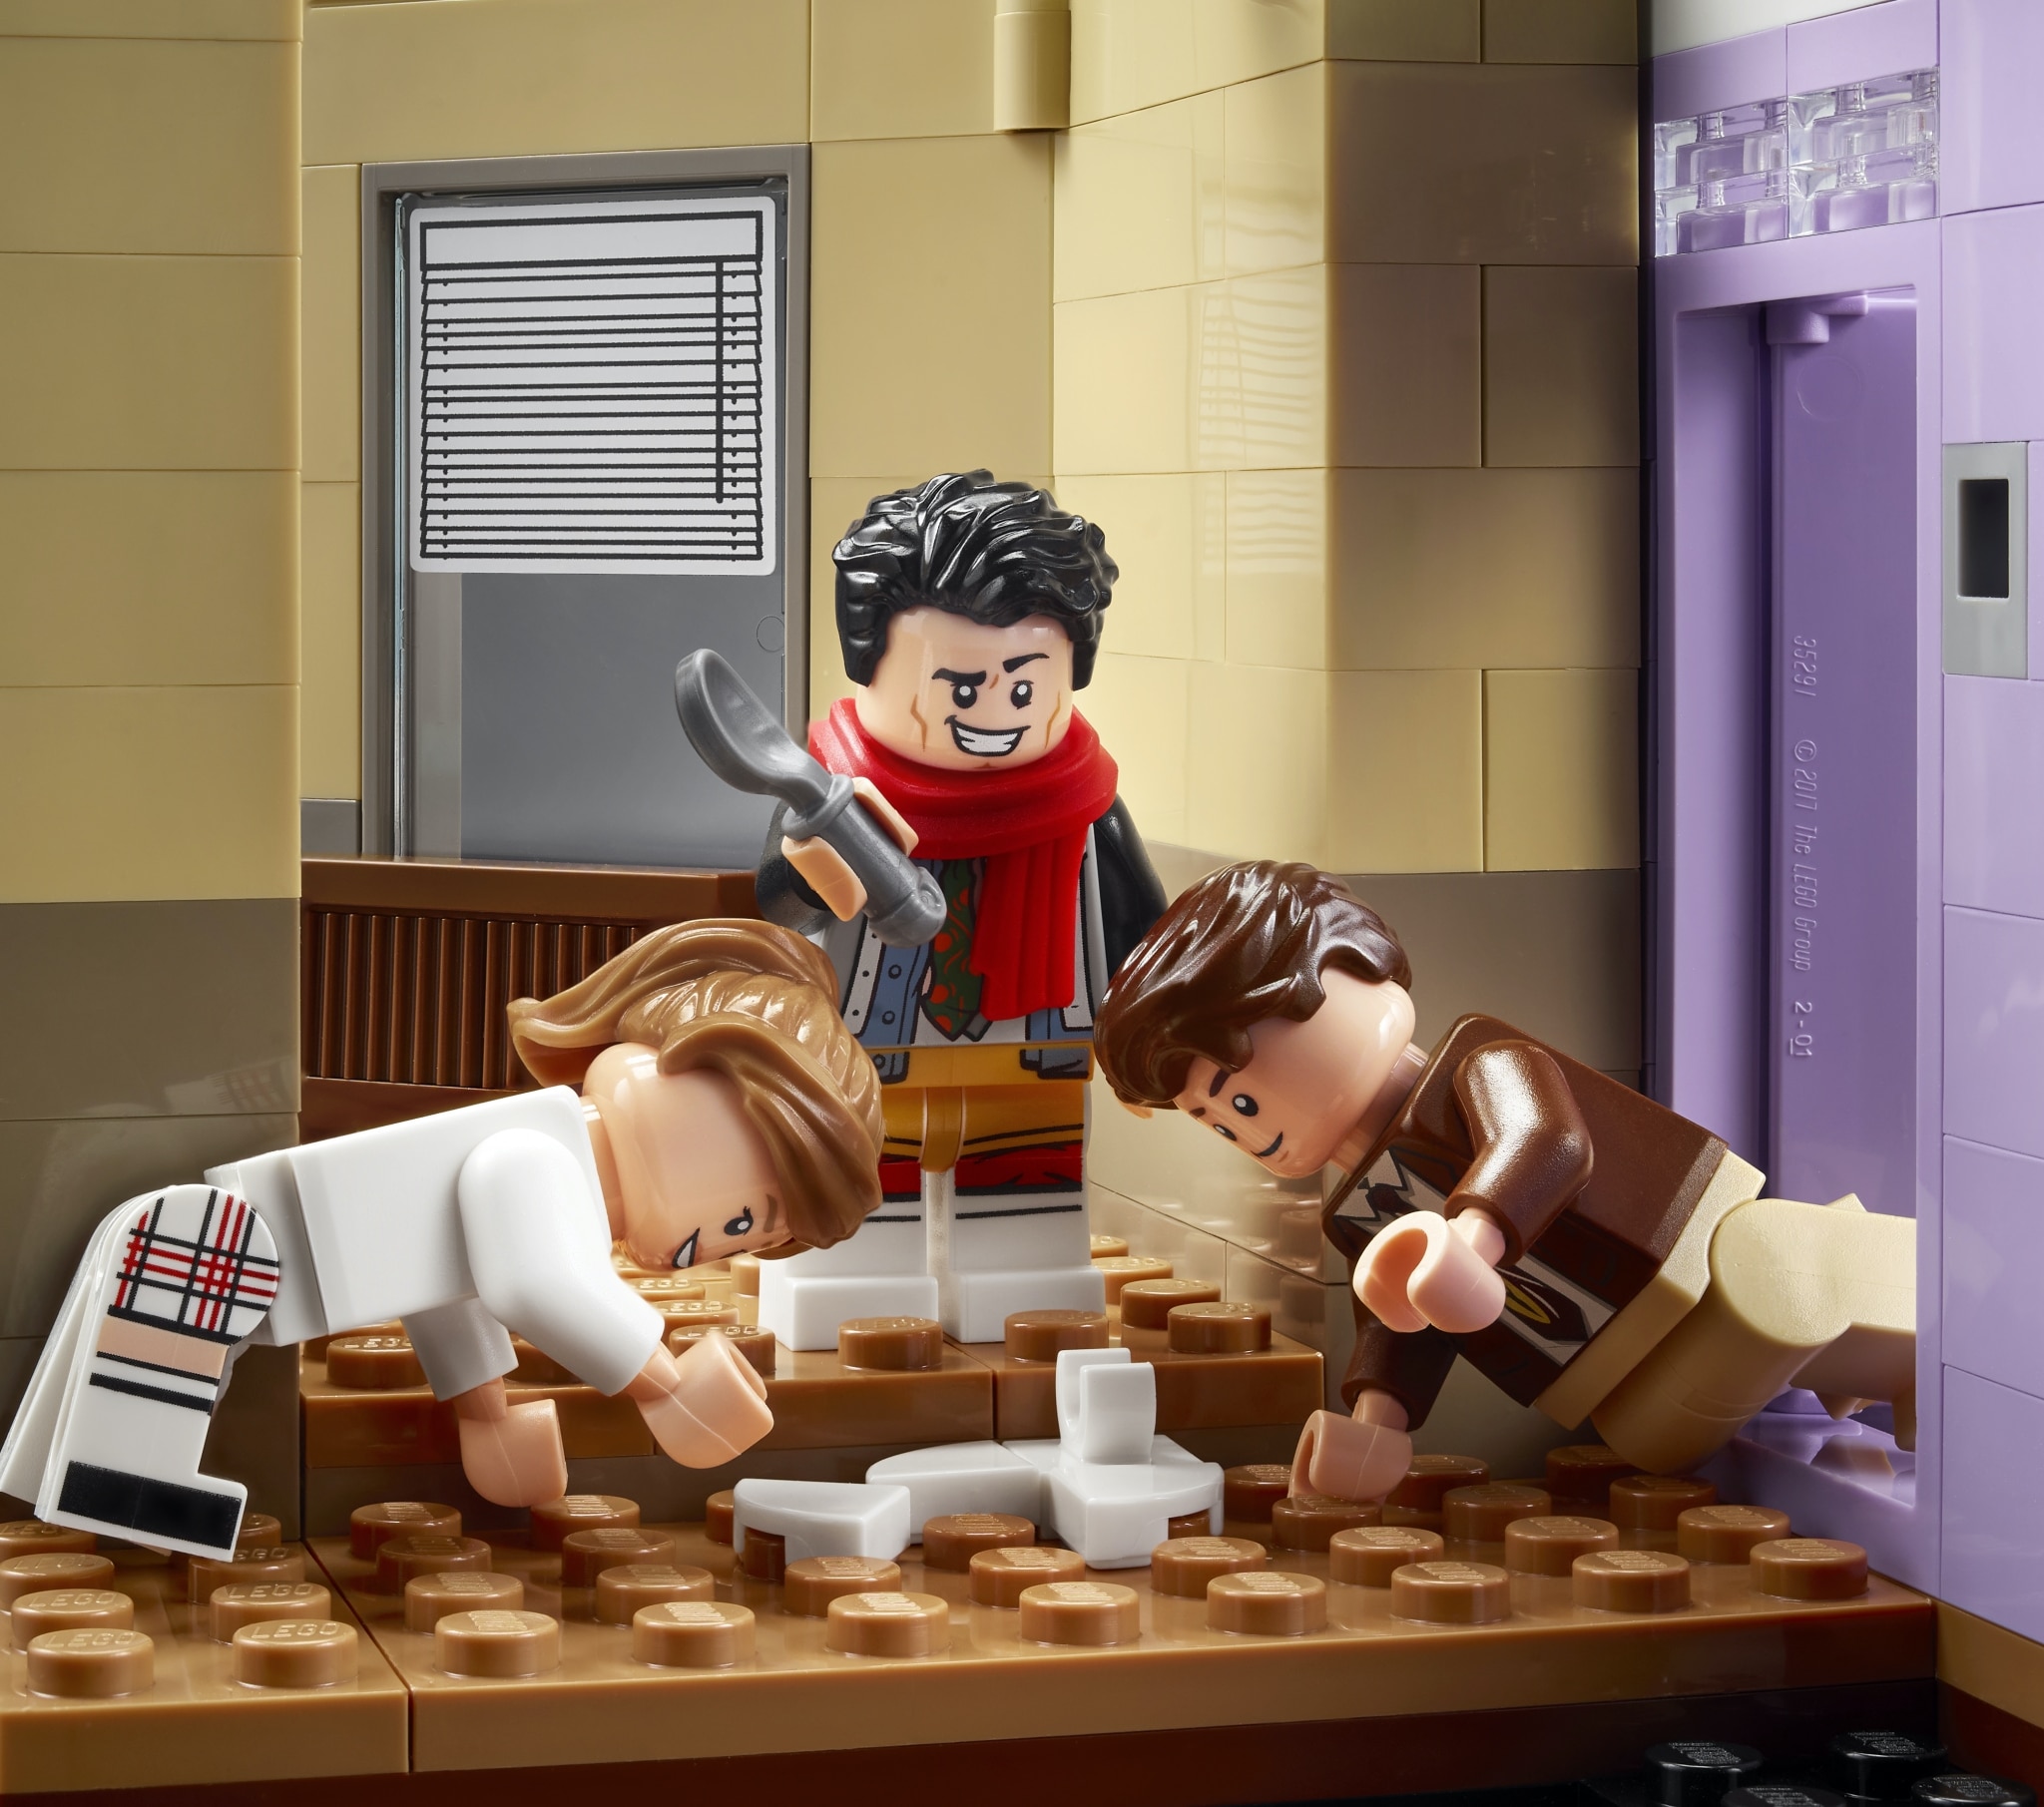 LEGO Launches 2,048Piece ‘Friends’ Set Including Both Apartments